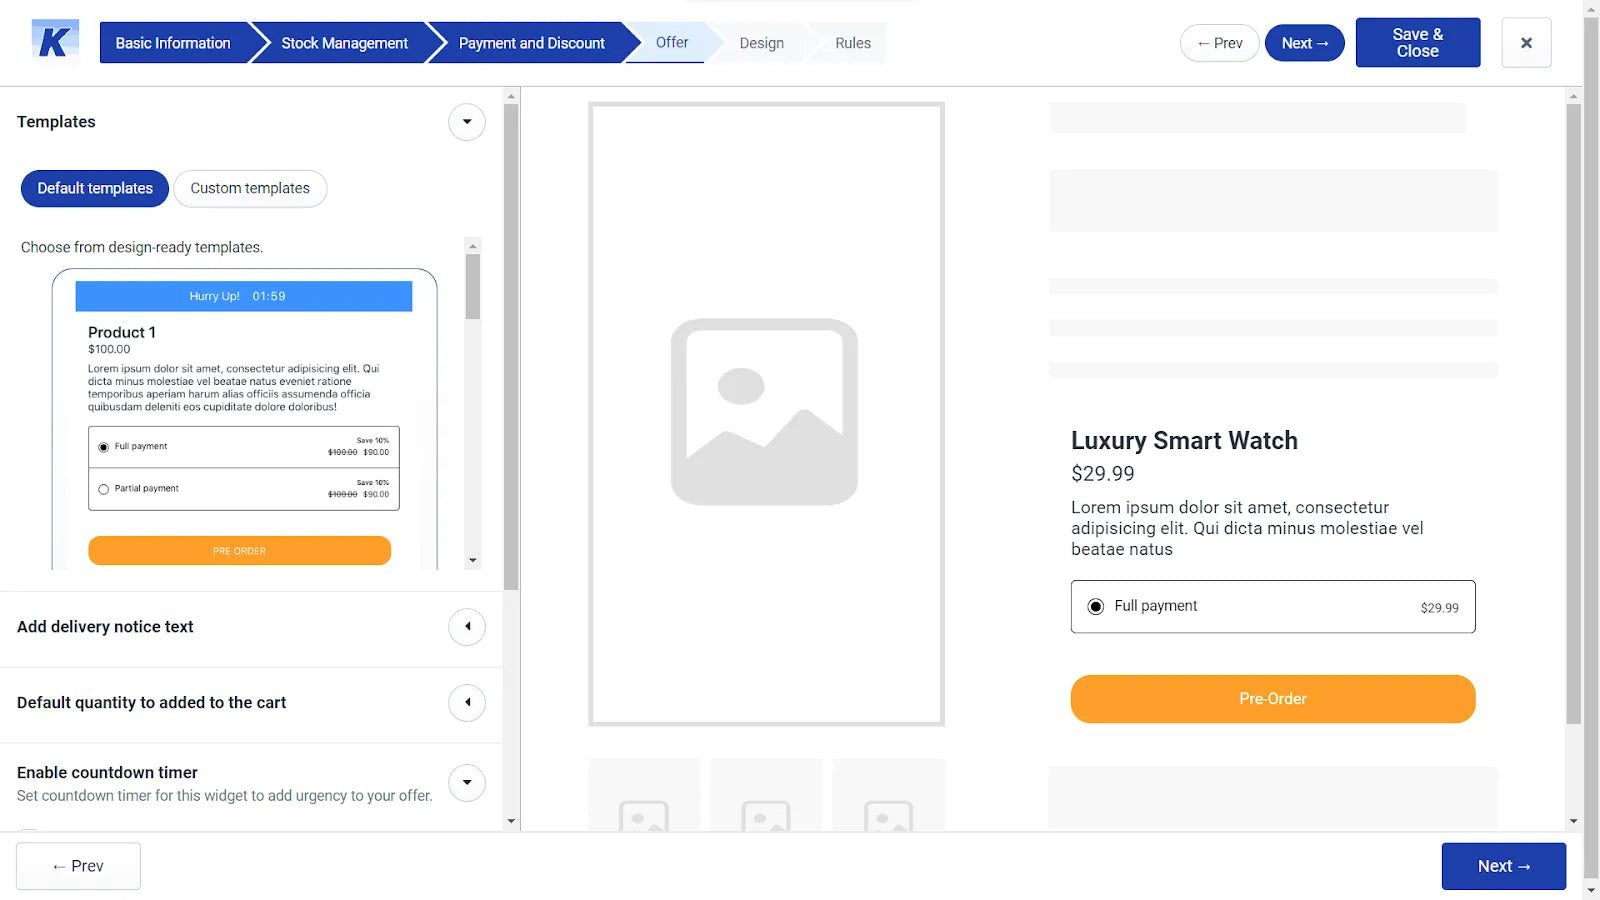 Creating a pre-order product in Shopify with the Kaktus app